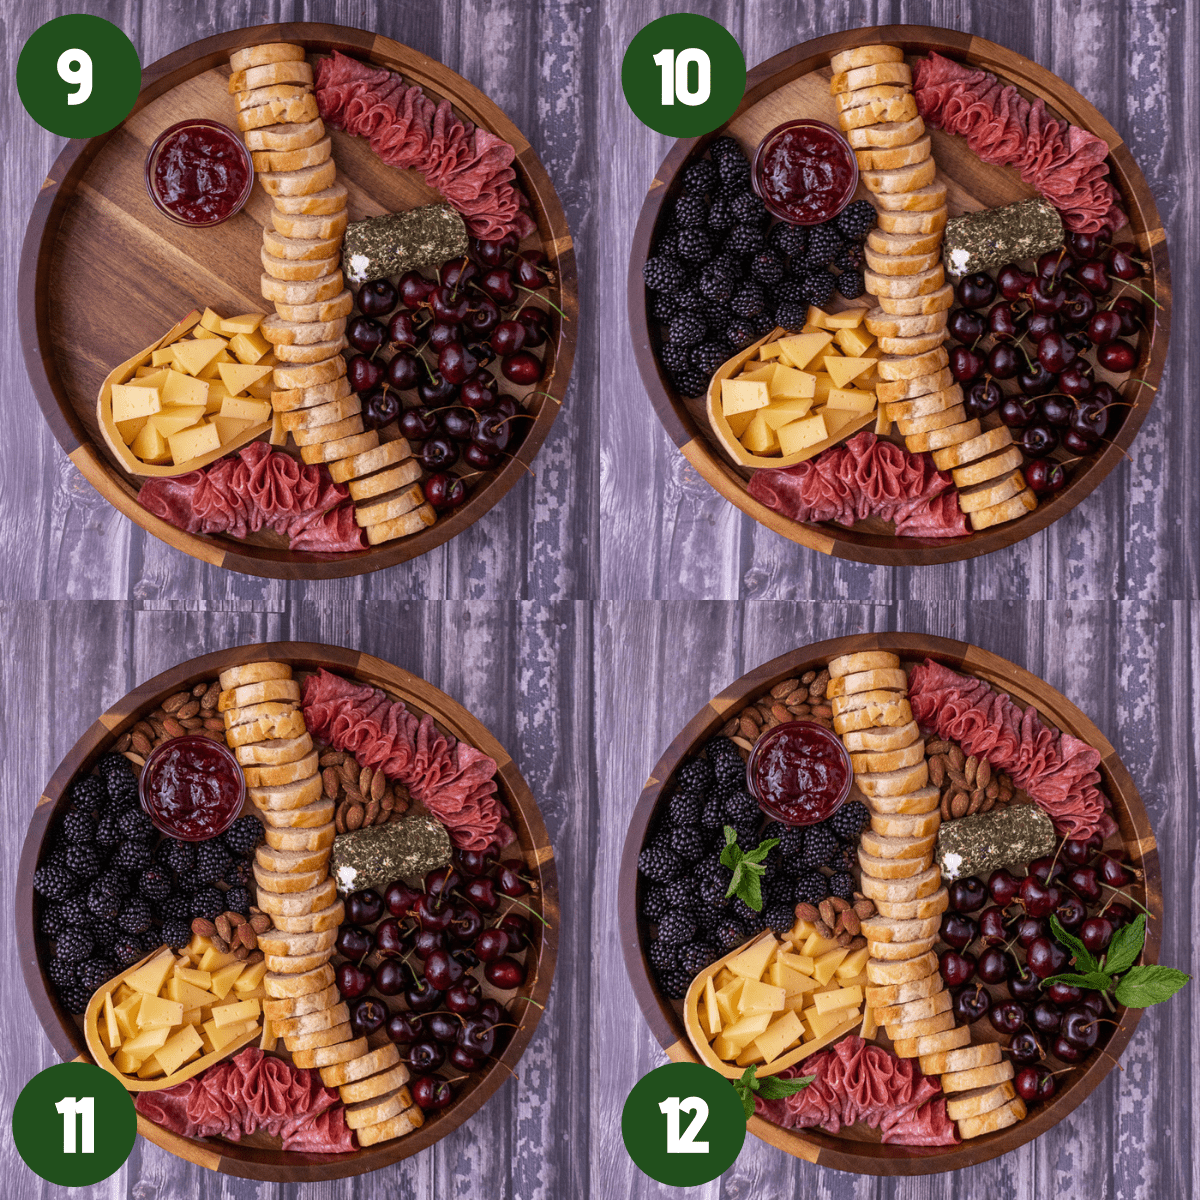 Process photos showing how to build a cheese plate Step 9) add in cherries to the bottom right. Step 10) Add in the blackberries to the top left Step 11) add in almond to fill holes. Step 12) Garnish with fresh mint